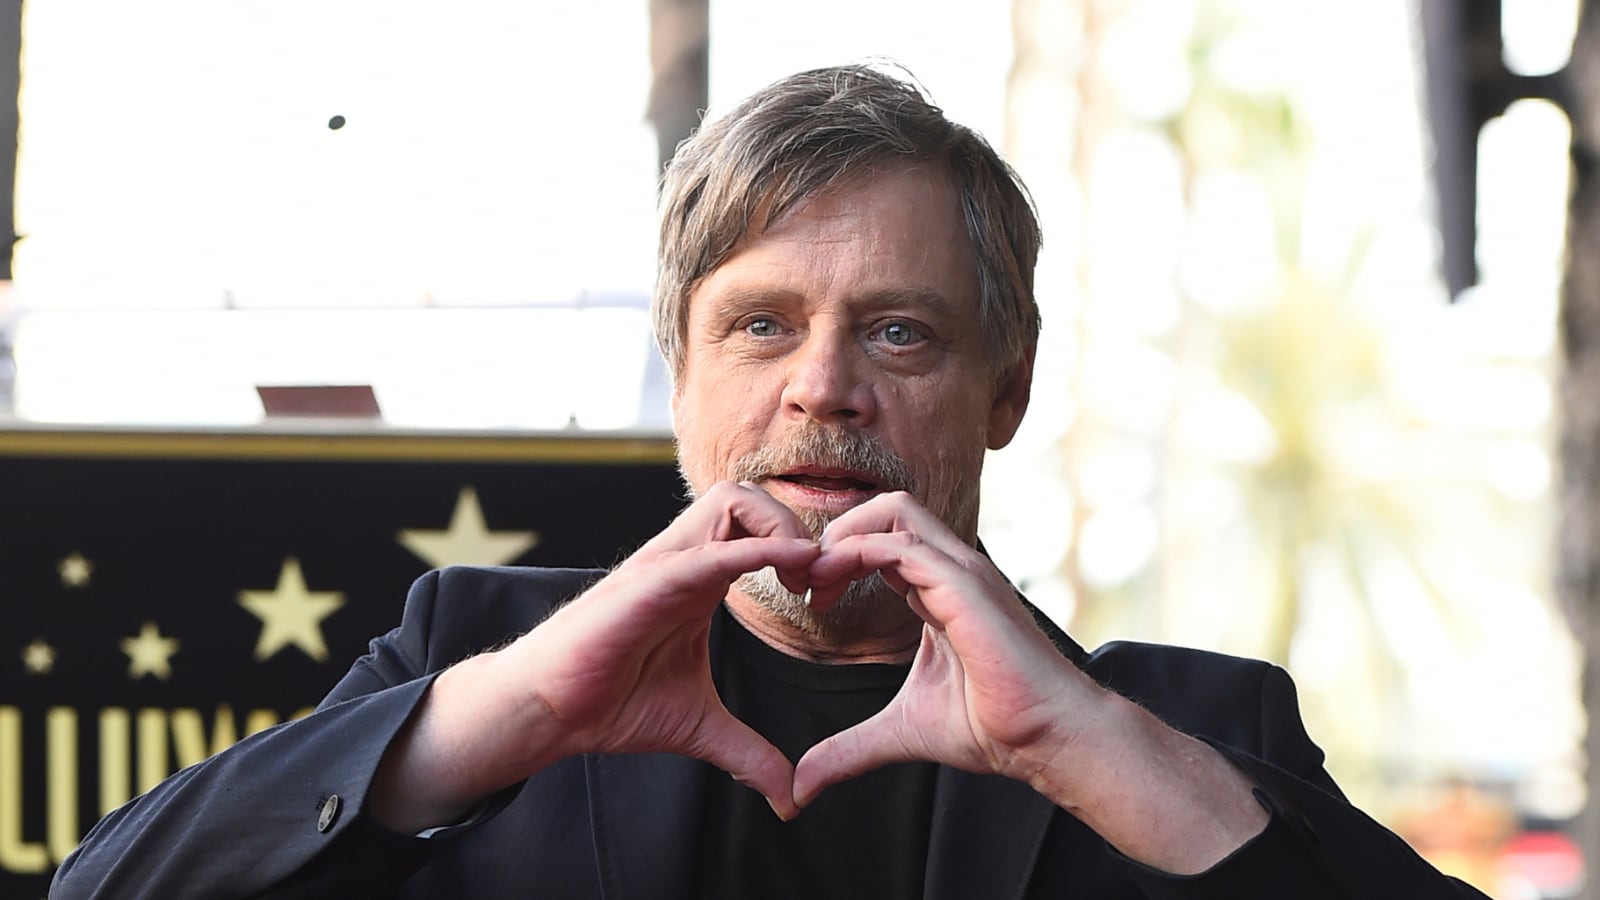 These Are the Drones You're Looking For: Mark Hamill Launches a fundraiser  for 10 RQ